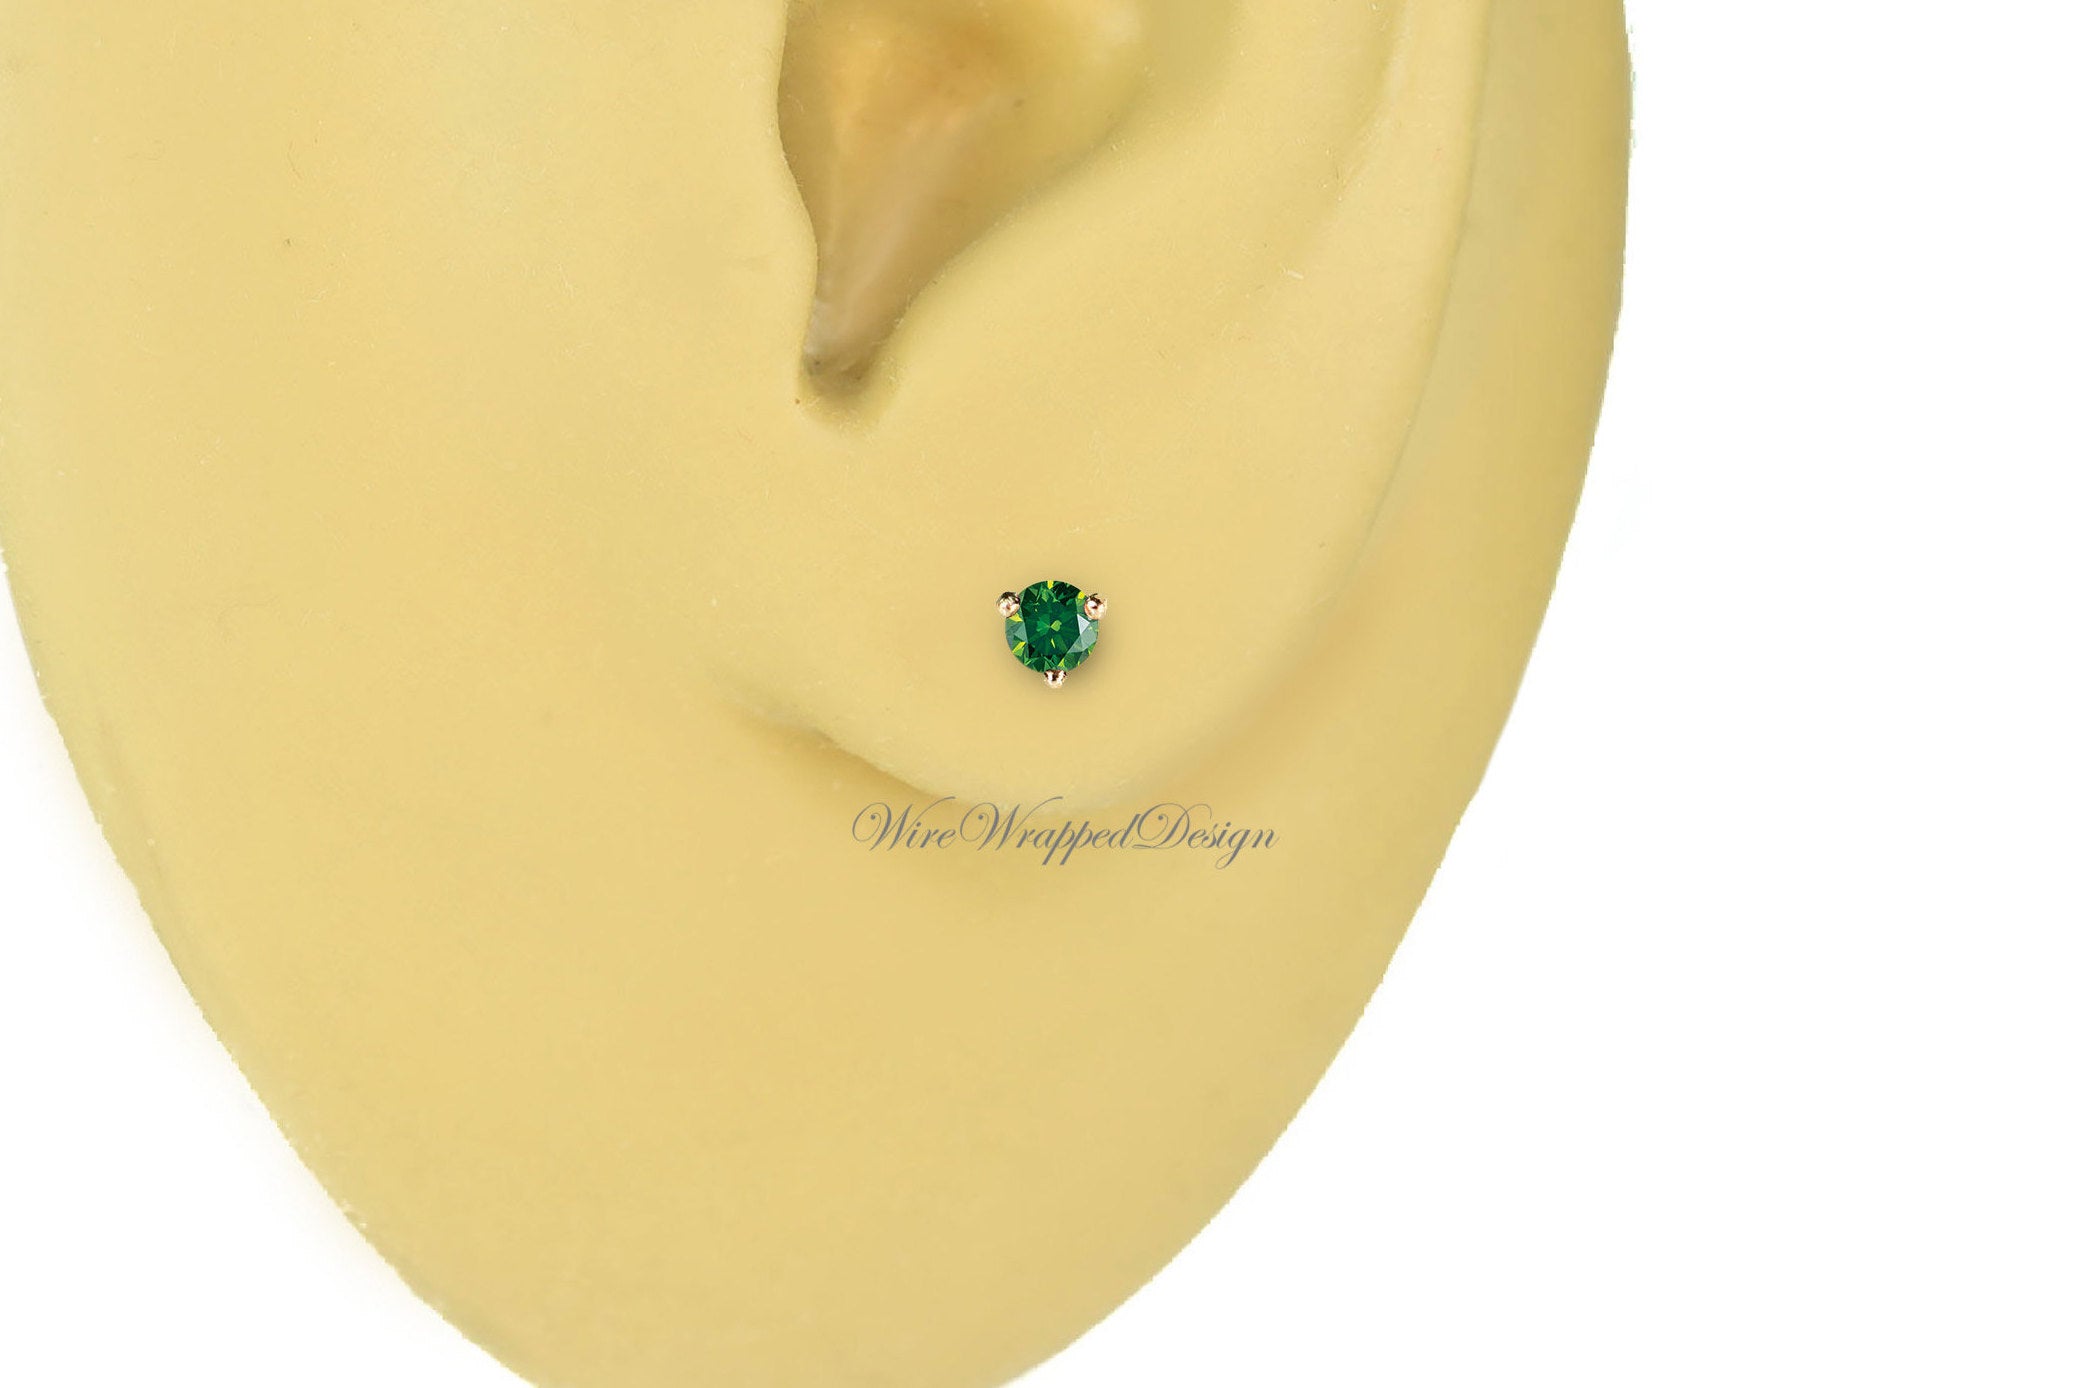 PAIR Genuine Dark GREEN DIAMOND Earrings Studs 2.5mm 0.12tcw Martini 14k Solid Gold (Yellow, Rose,White) Platinum Silver Cartilage Helix